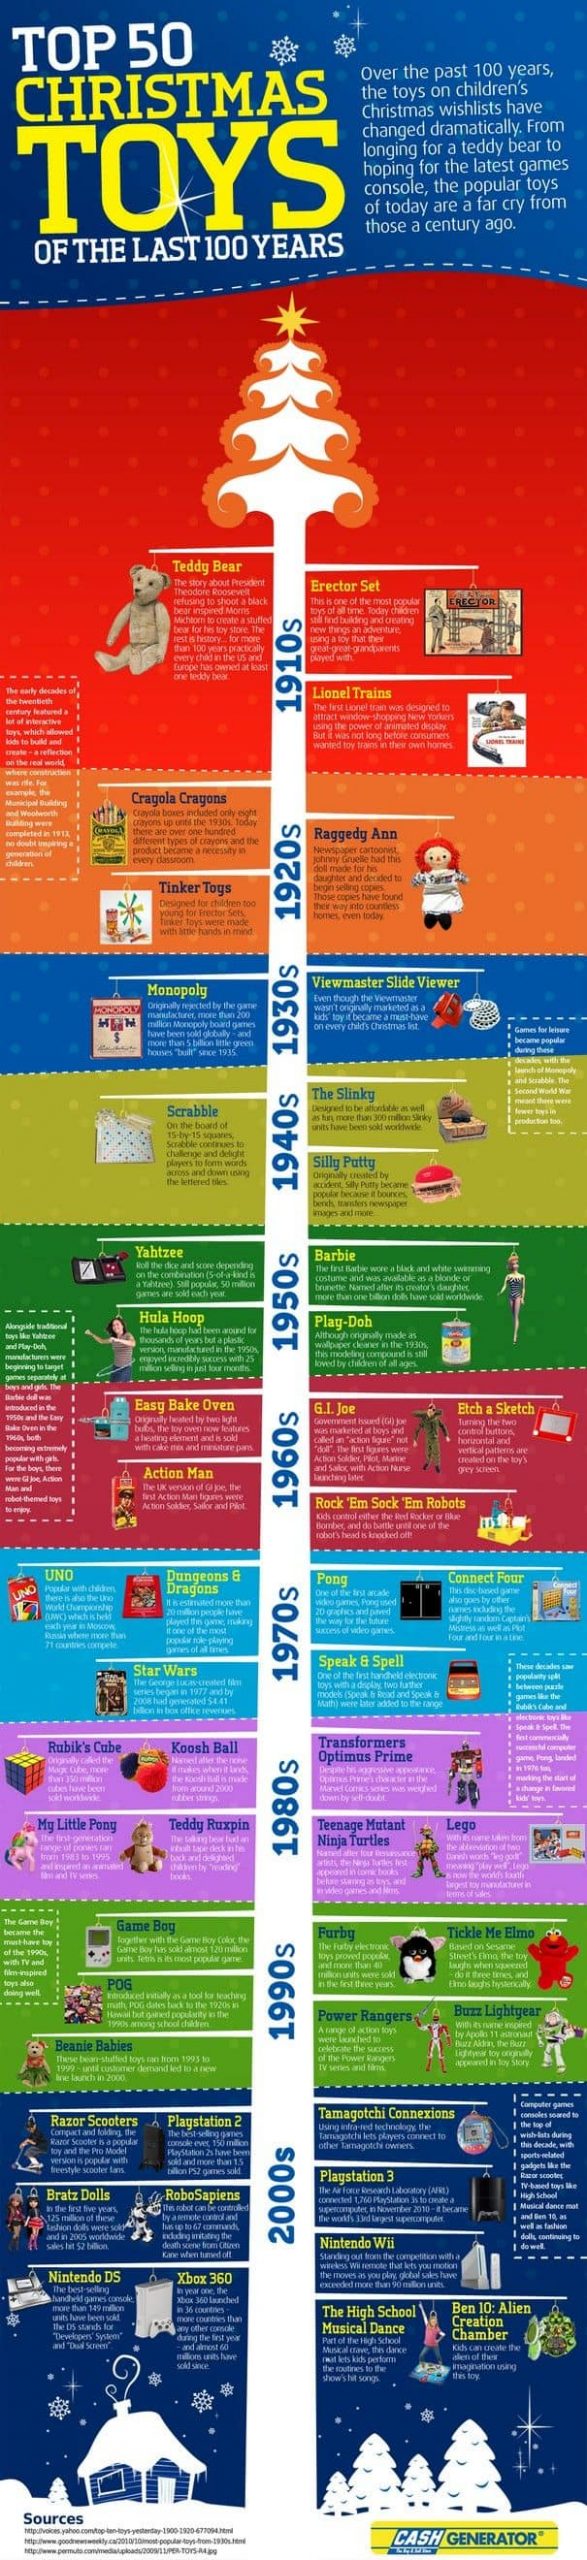 Top 50 toys of the last 100 years [Infographic]